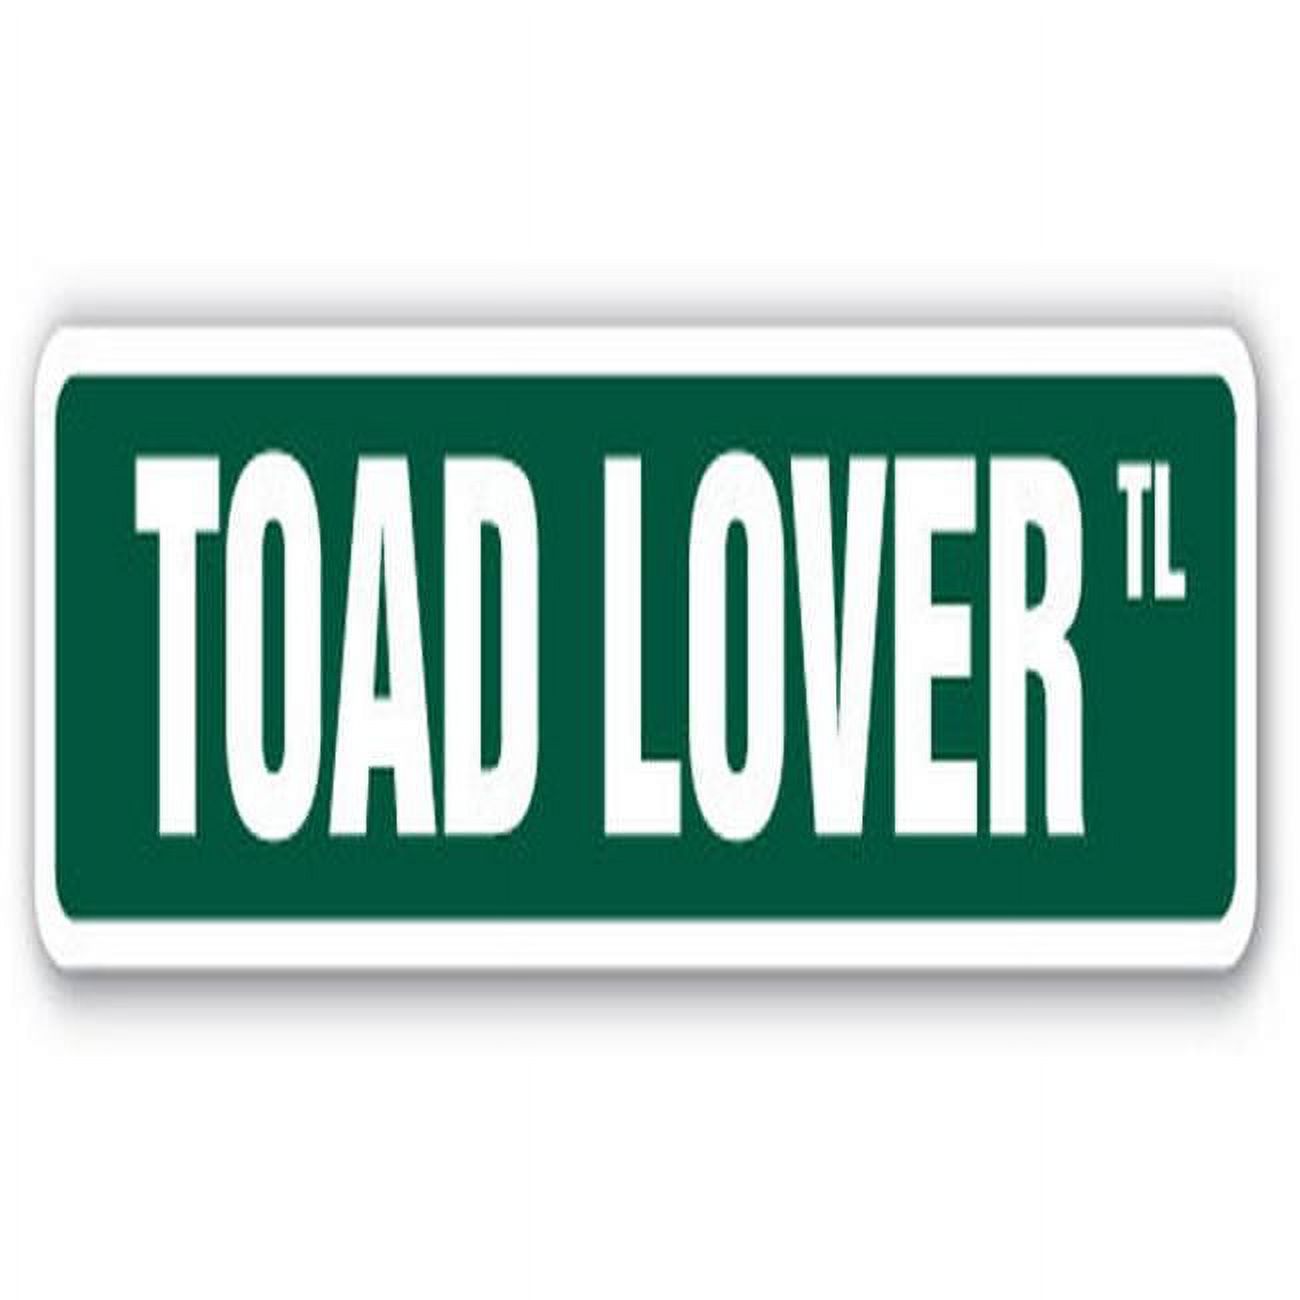 SignMission SS-Toad Lover 18 in. Toad Lover Street Sign - Frog Pond River Water Slime - image 1 of 5